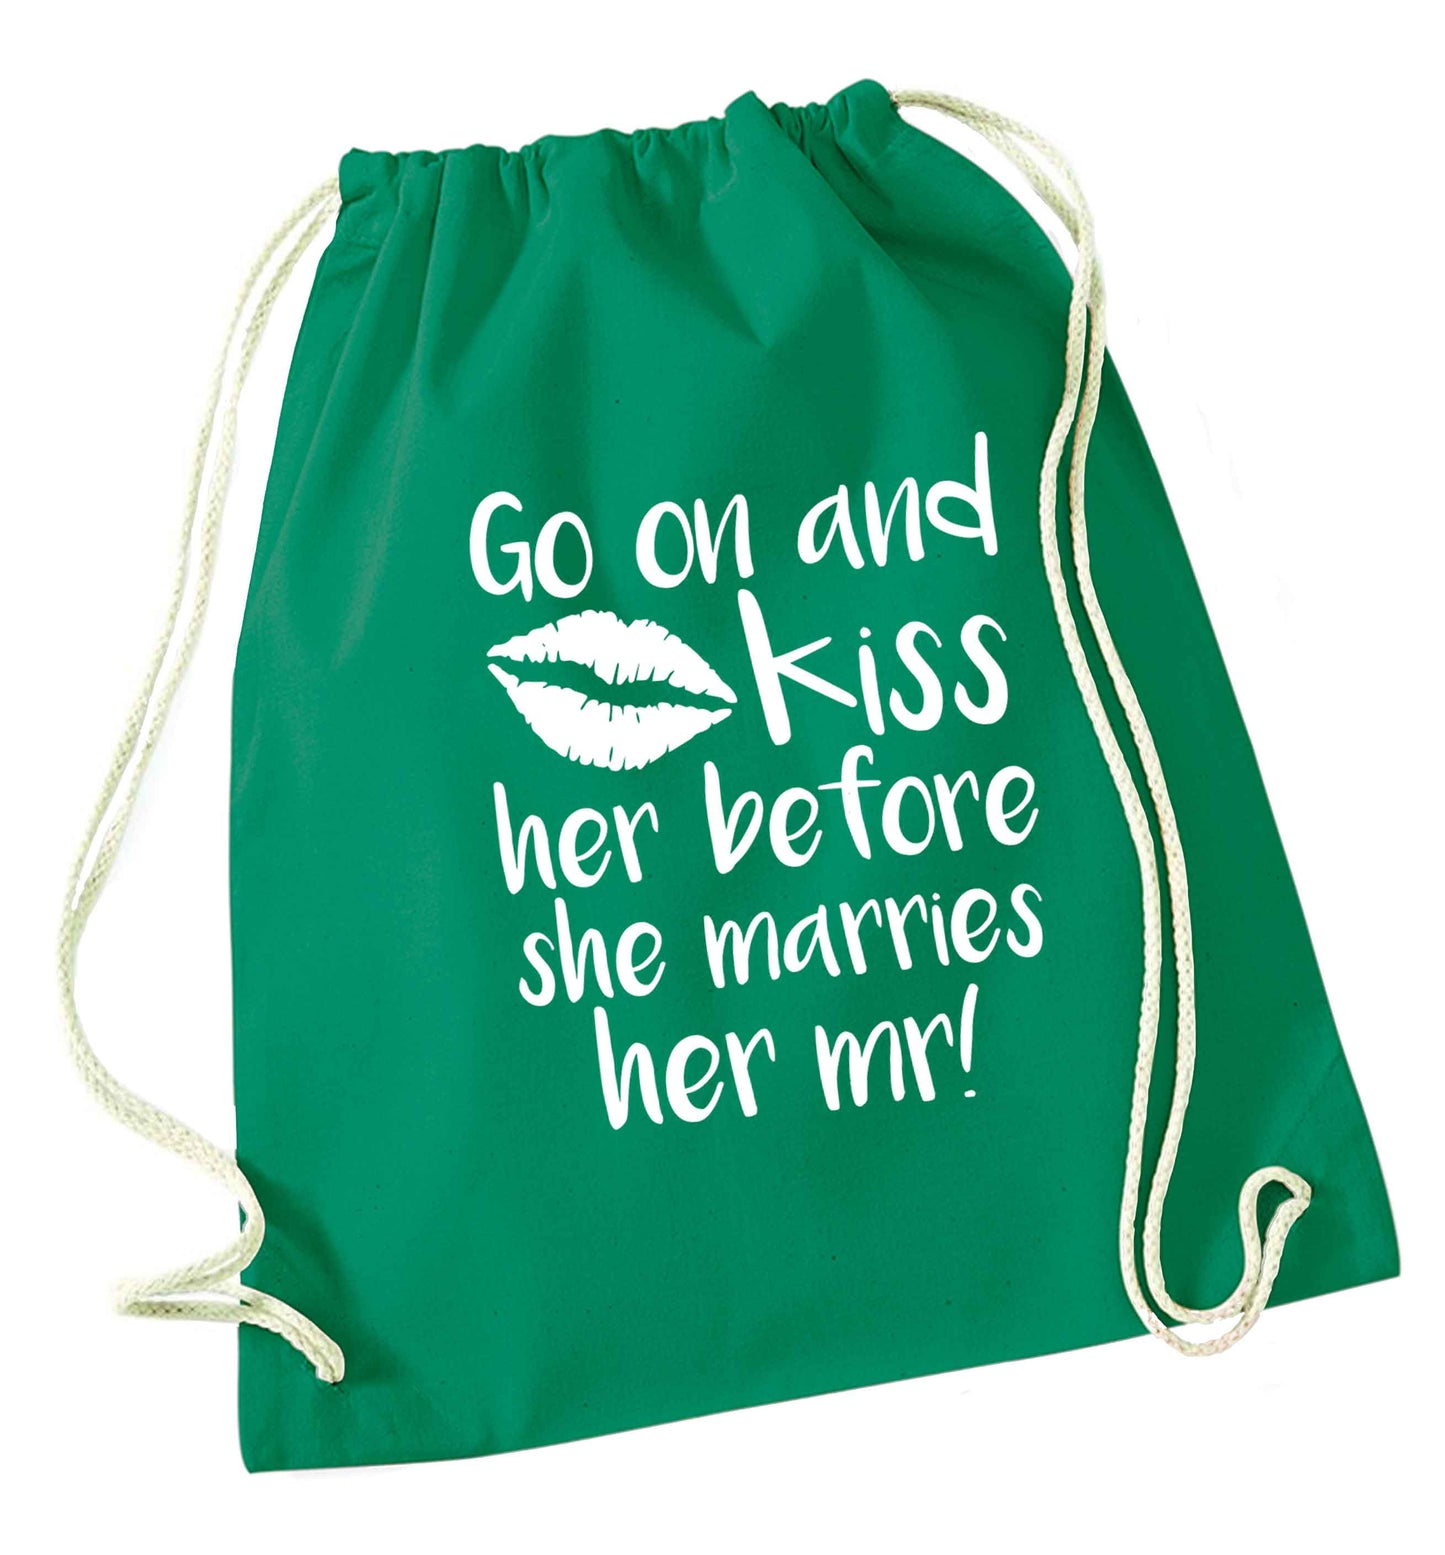 Kiss her before she marries her mr! green drawstring bag